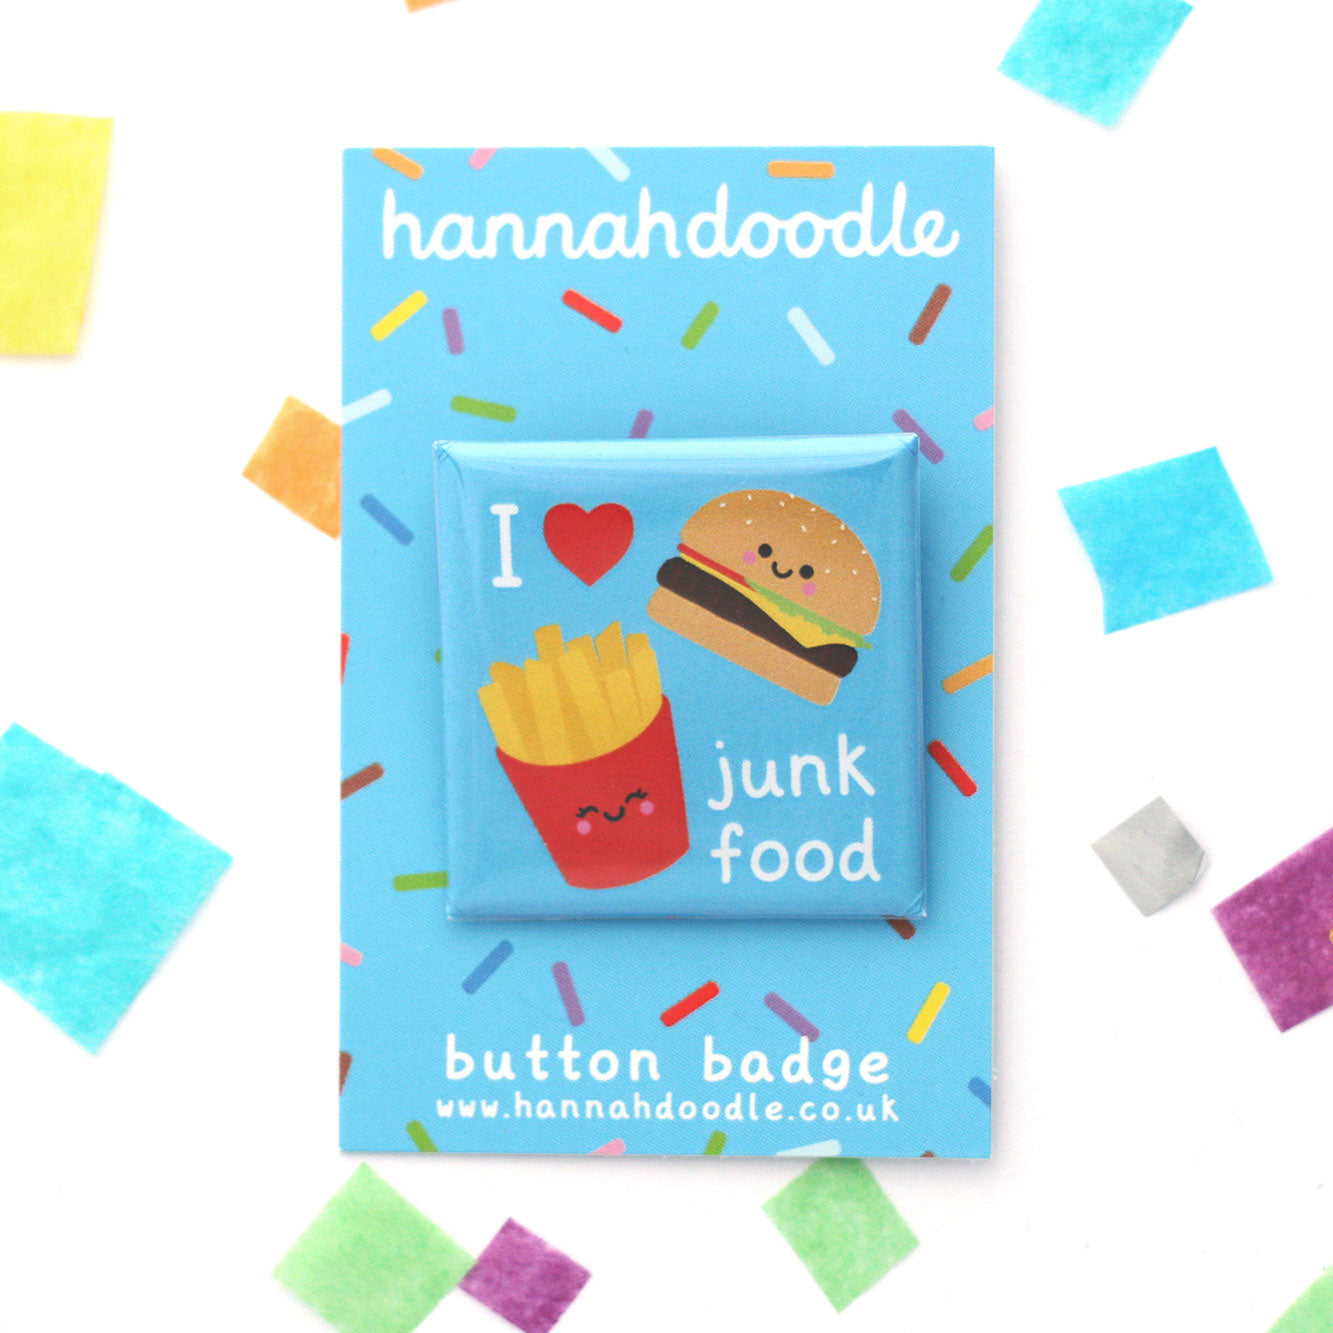 Square button badge with I heart junk food text and burger and fries illustration